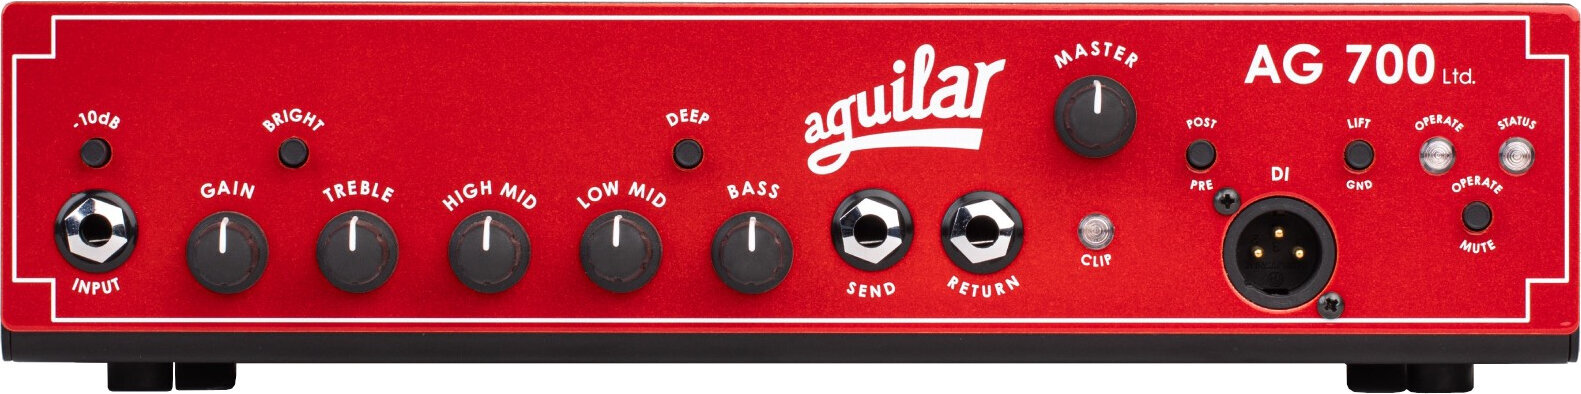 Solid-State Bass Amplifier Aguilar AG 700 Red